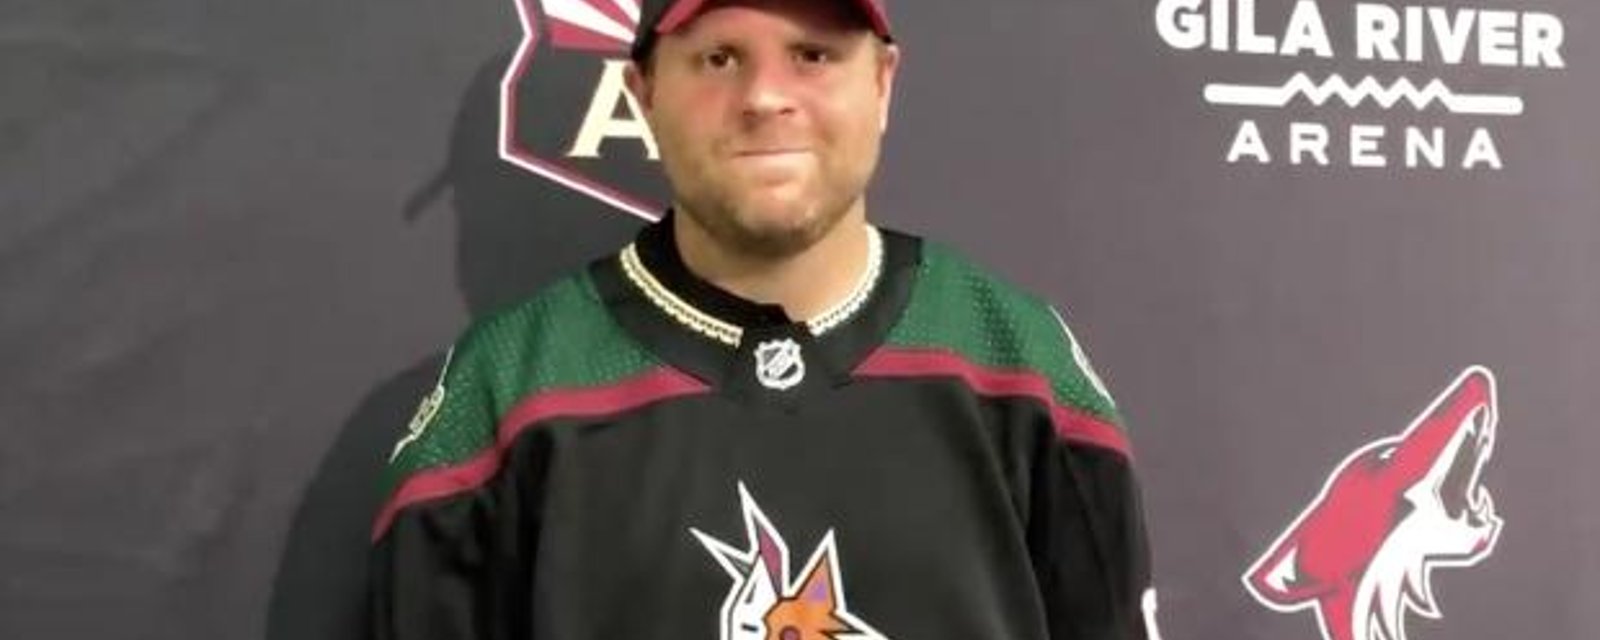 Kessel offers the weirdest message to his new fans in Arizona